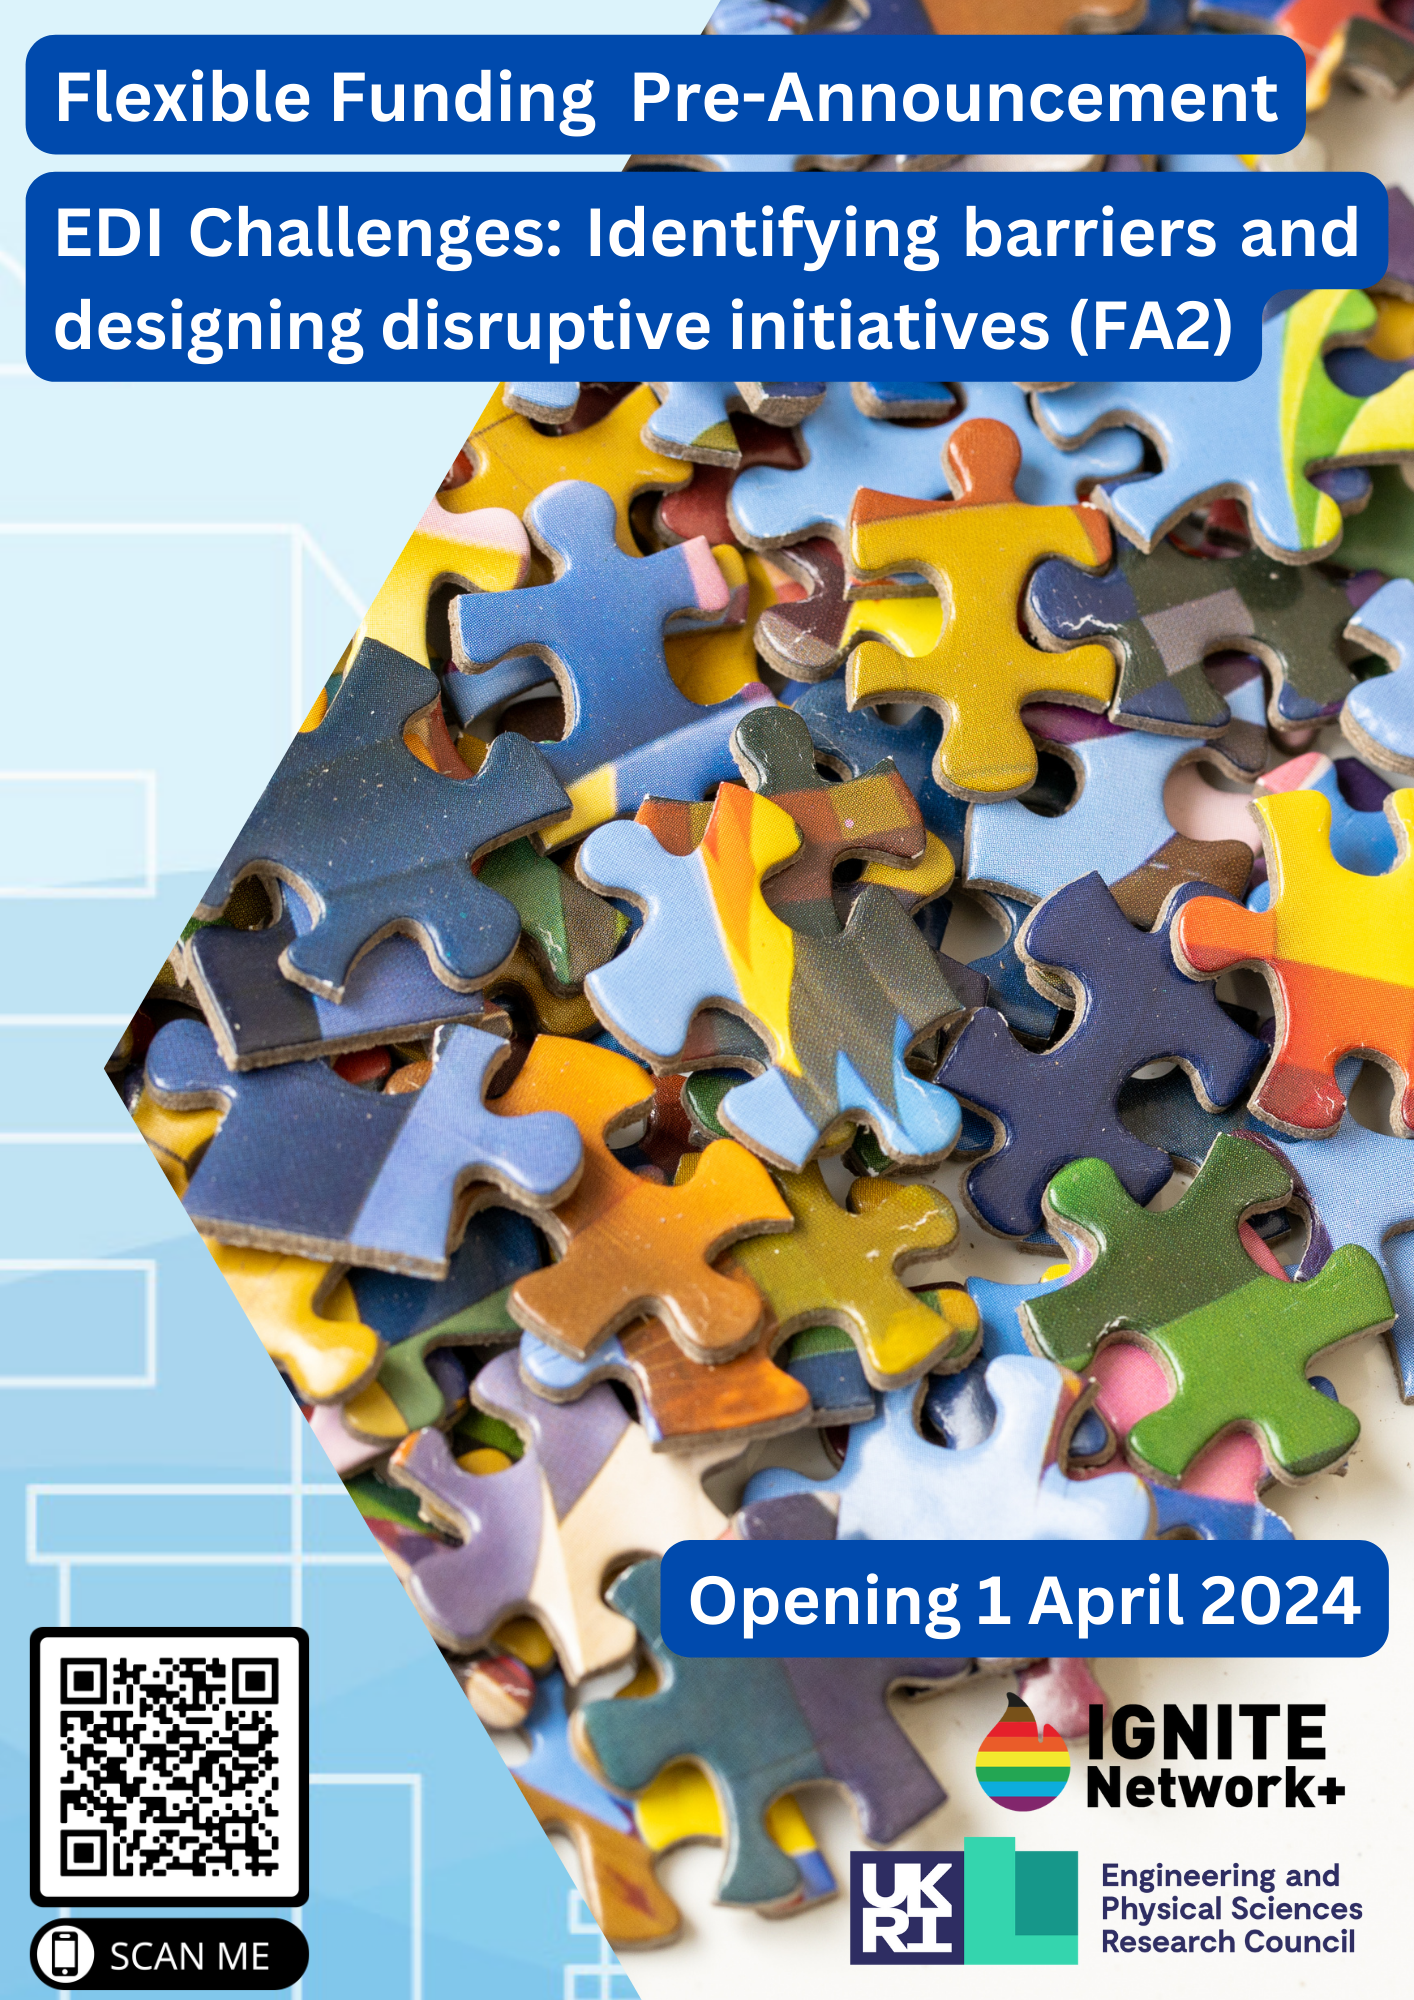 Flexible Funding Pre-Announcement EDI Challenges: Identifying barriers and designing disruptive initiatives (FA2) Opening 1 April 2024